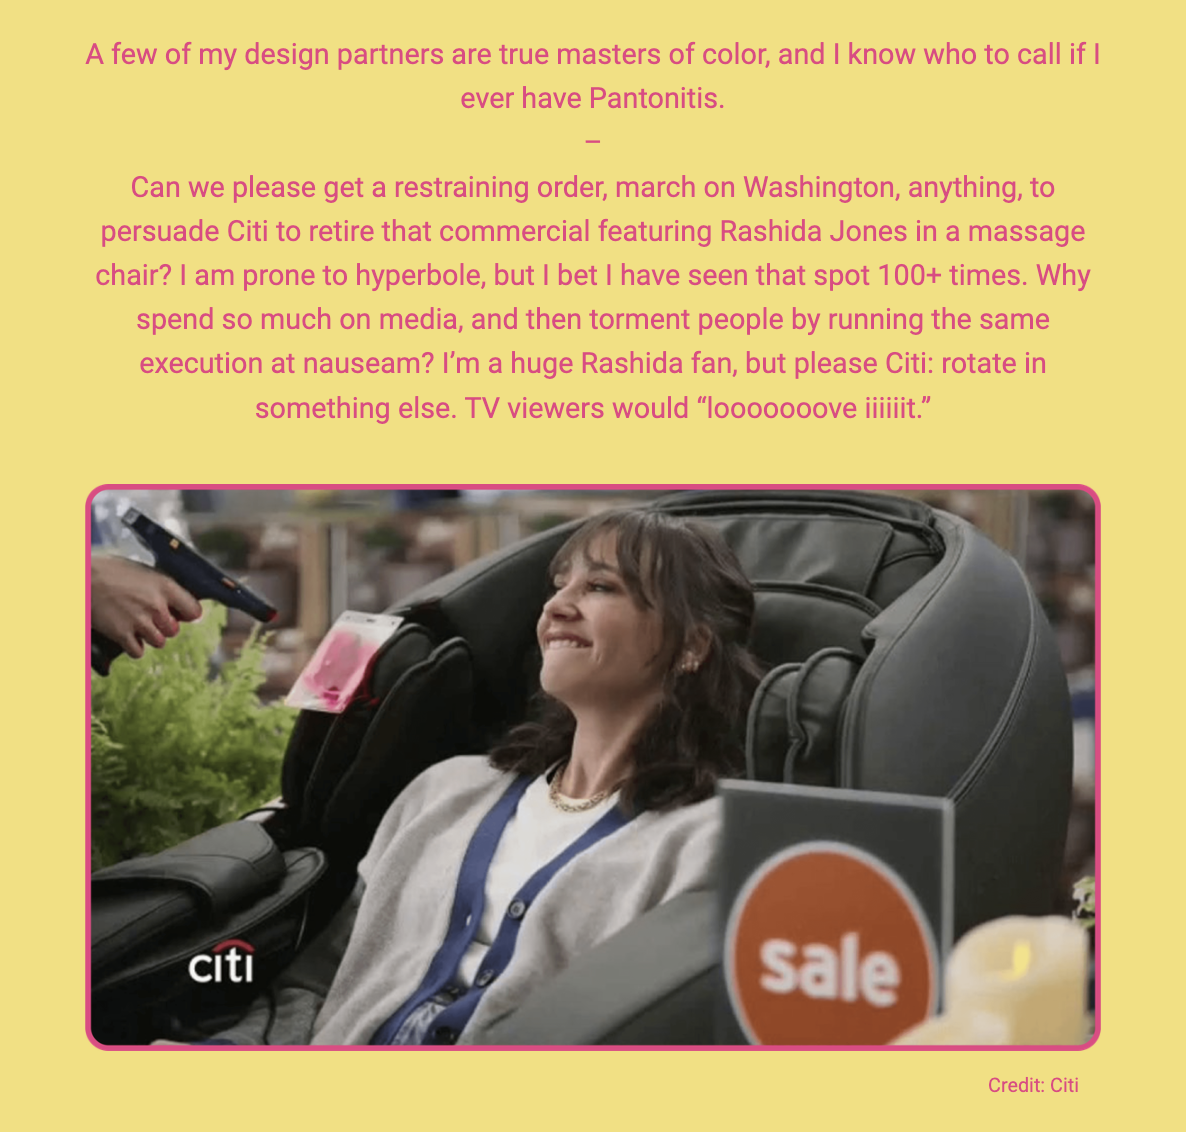 The image features a photograph of actress Rashida Jones sitting in a massage chair, looking relaxed and smiling, with a remote control in her hand. The Citi logo and a "Sale" sign are also visible, suggesting that this is a still from a commercial for Citi. Accompanying the image is a text expressing the author's exasperation at the frequent airing of this particular Citi commercial featuring Rashida Jones. The writer conveys a mix of humor and critique, stating a preference for diversity in advertisements and expressing a wish for the commercial to be replaced with different content. The lighthearted closing remark suggests that TV viewers would greatly enjoy a change.

The text within the image reads:
"A few of my design partners are true masters of color, and I know who to call if I ever have Pantontitis.

Can we please get a restraining order, march on Washington, anything, to persuade Citi to retire that commercial featuring Rashida Jones in a massage chair? I am prone to hyperbole, but I bet I have seen that spot 100+ times. Why spend so much on media, and then torment people by running the same execution at nauseam? I’m a huge Rashida fan, but please Citi: rotate in something else. TV viewers would 'looooooove iiiiit.'

Credit: Citi"